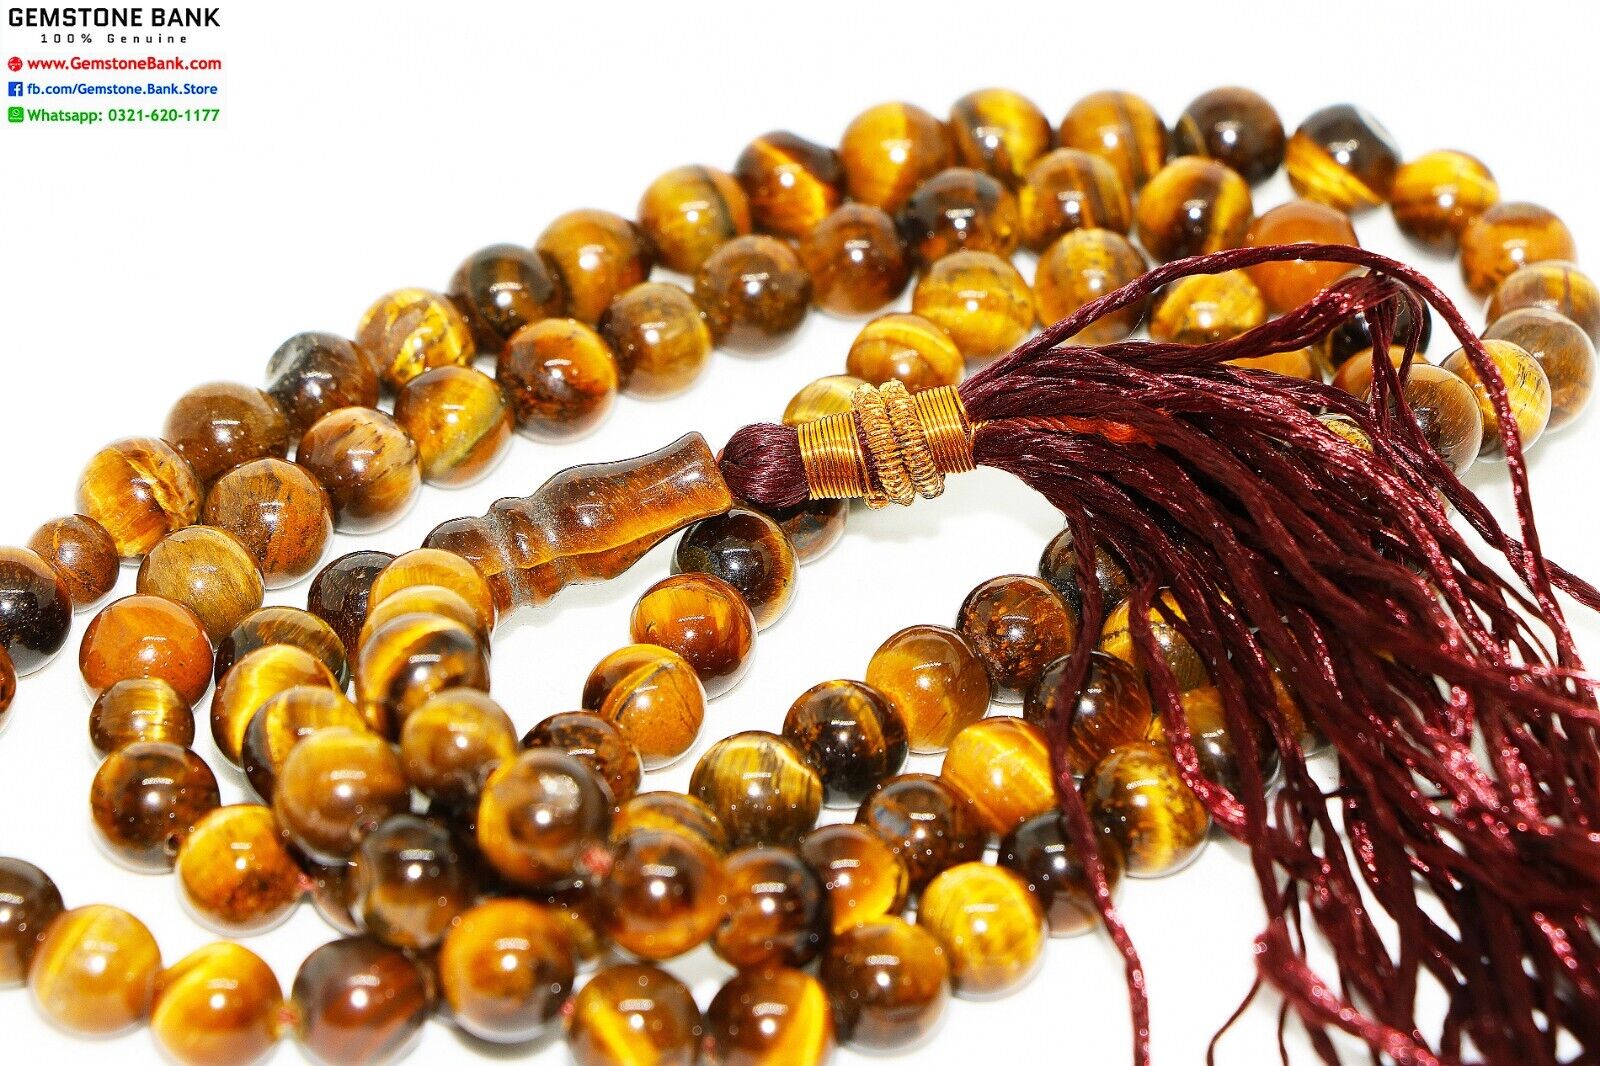 8mm -CERTIFIED Natural TIGER EYE Stone Beads, Misbaha Rosary Prayer Beads 99